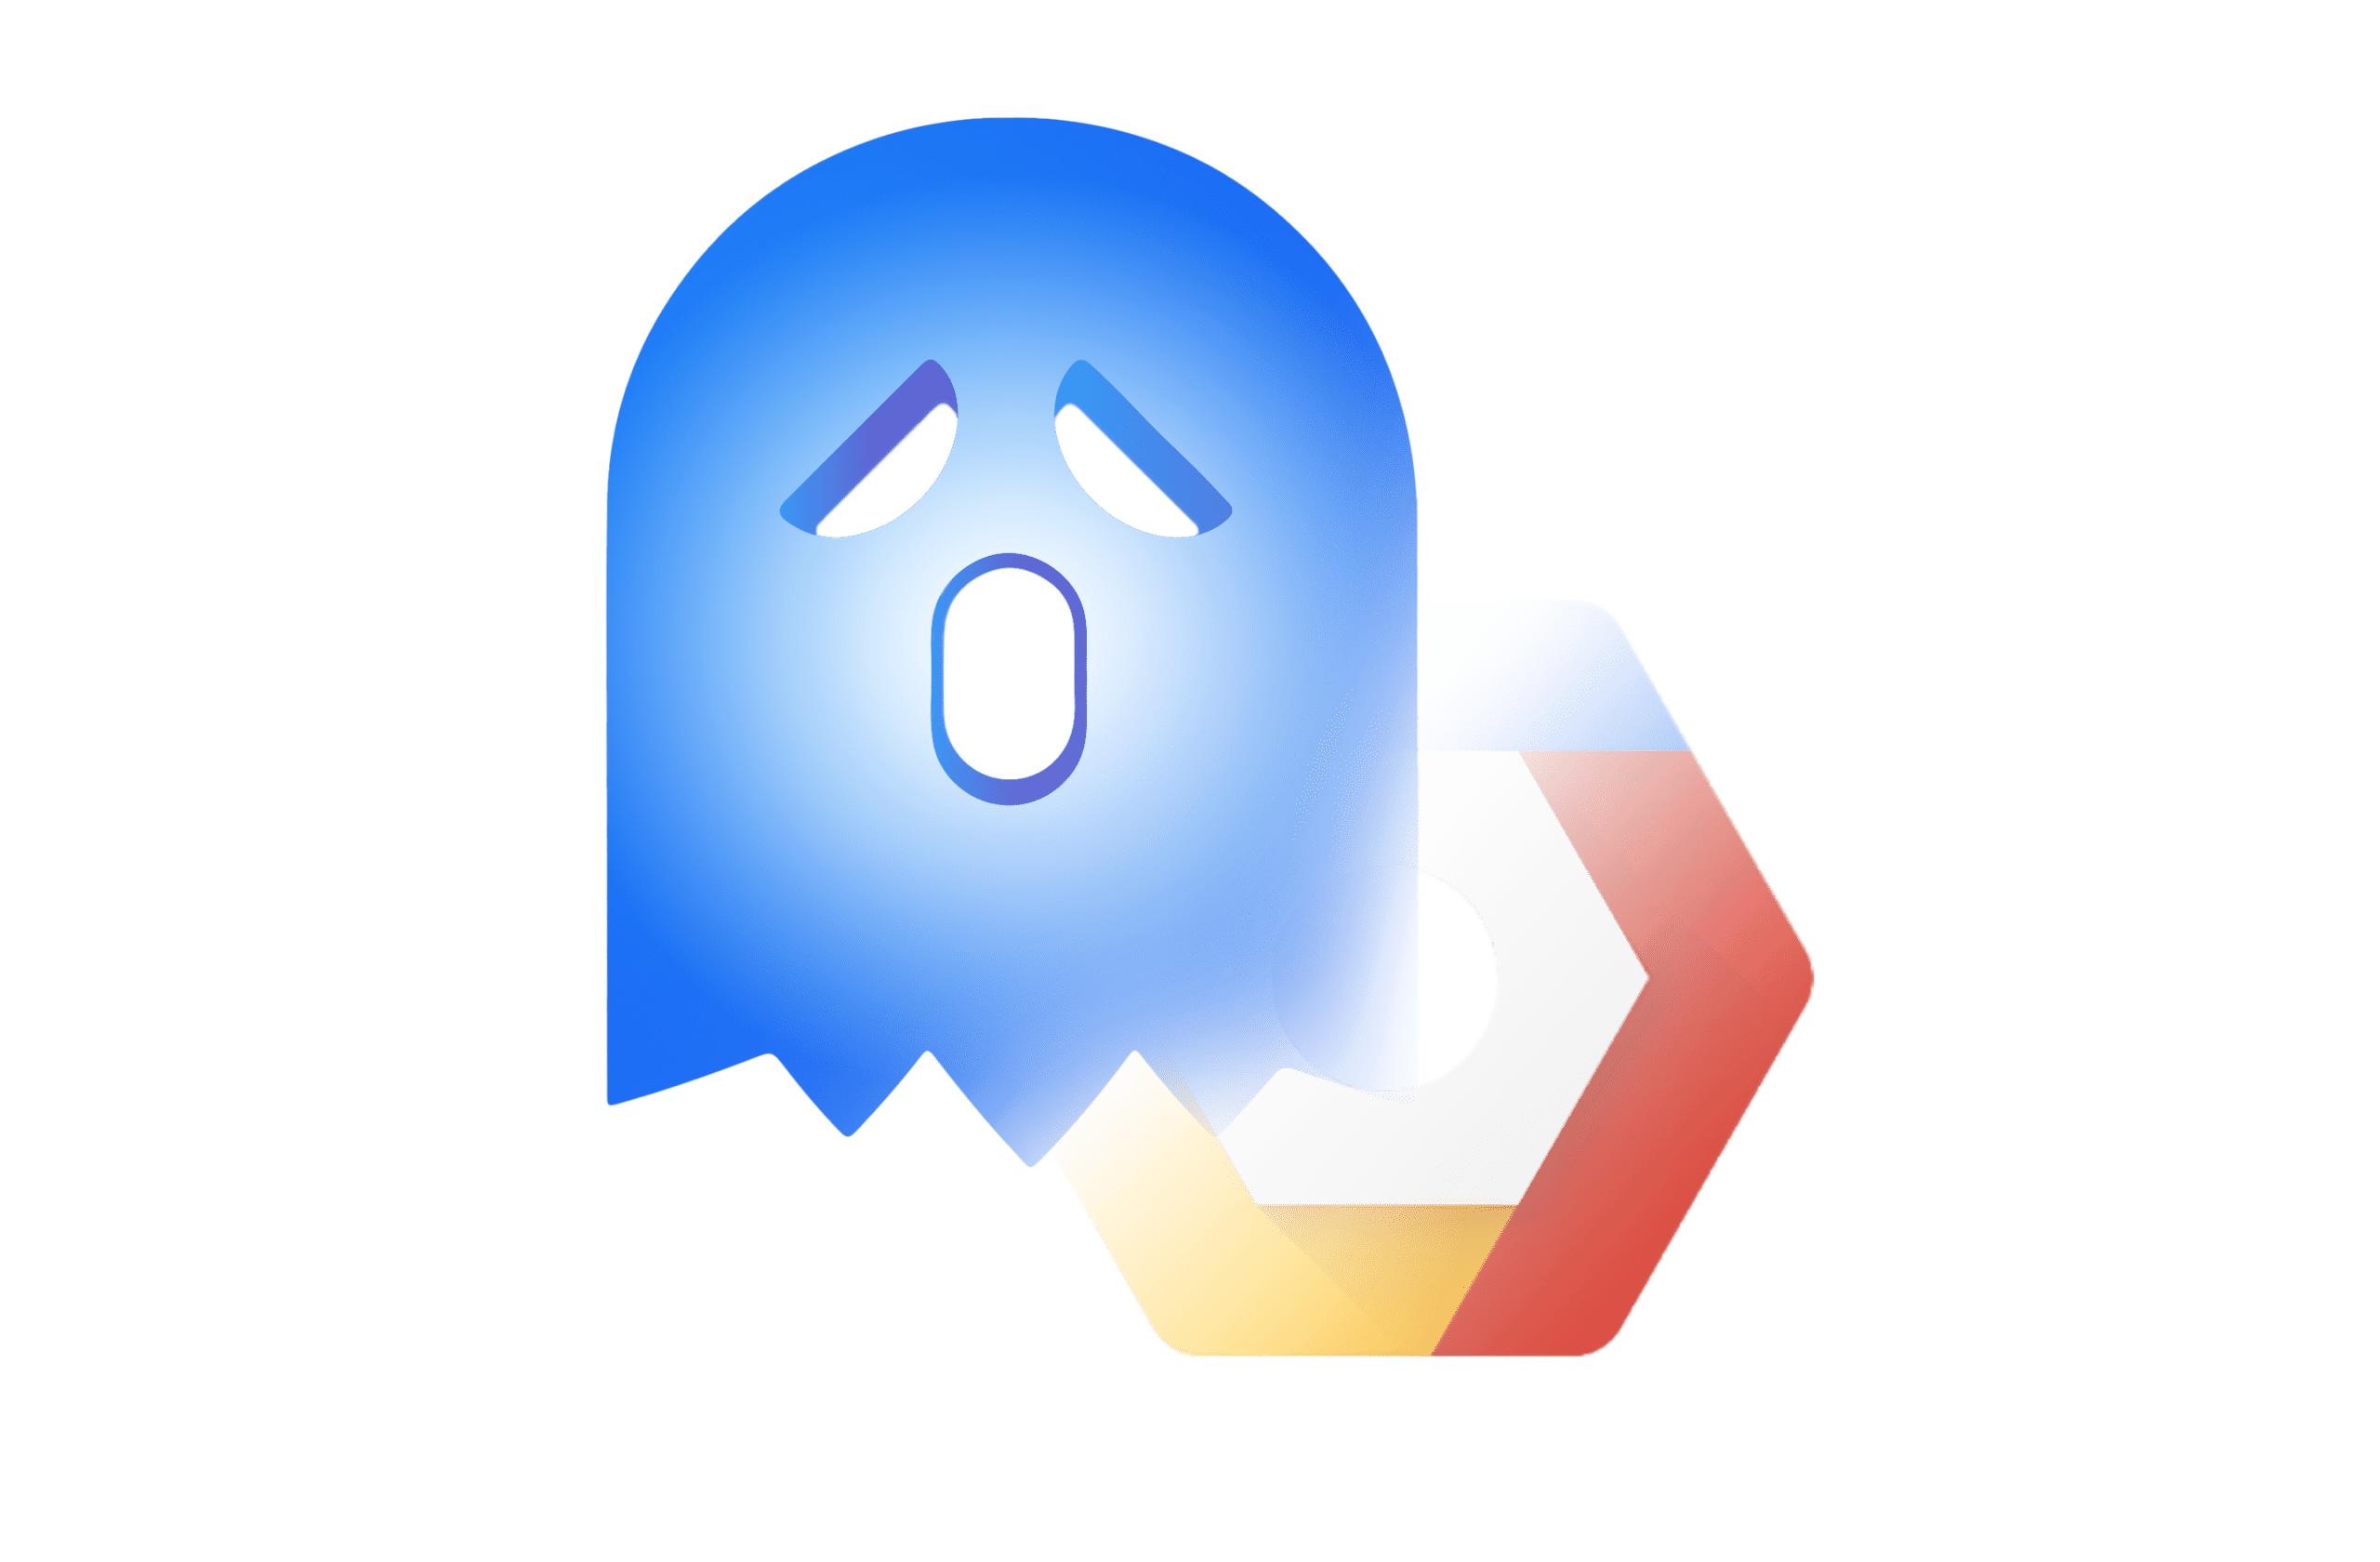 GhostToken – Exploiting GCP application infrastructure to create invisible, unremovable trojan app on Google accounts